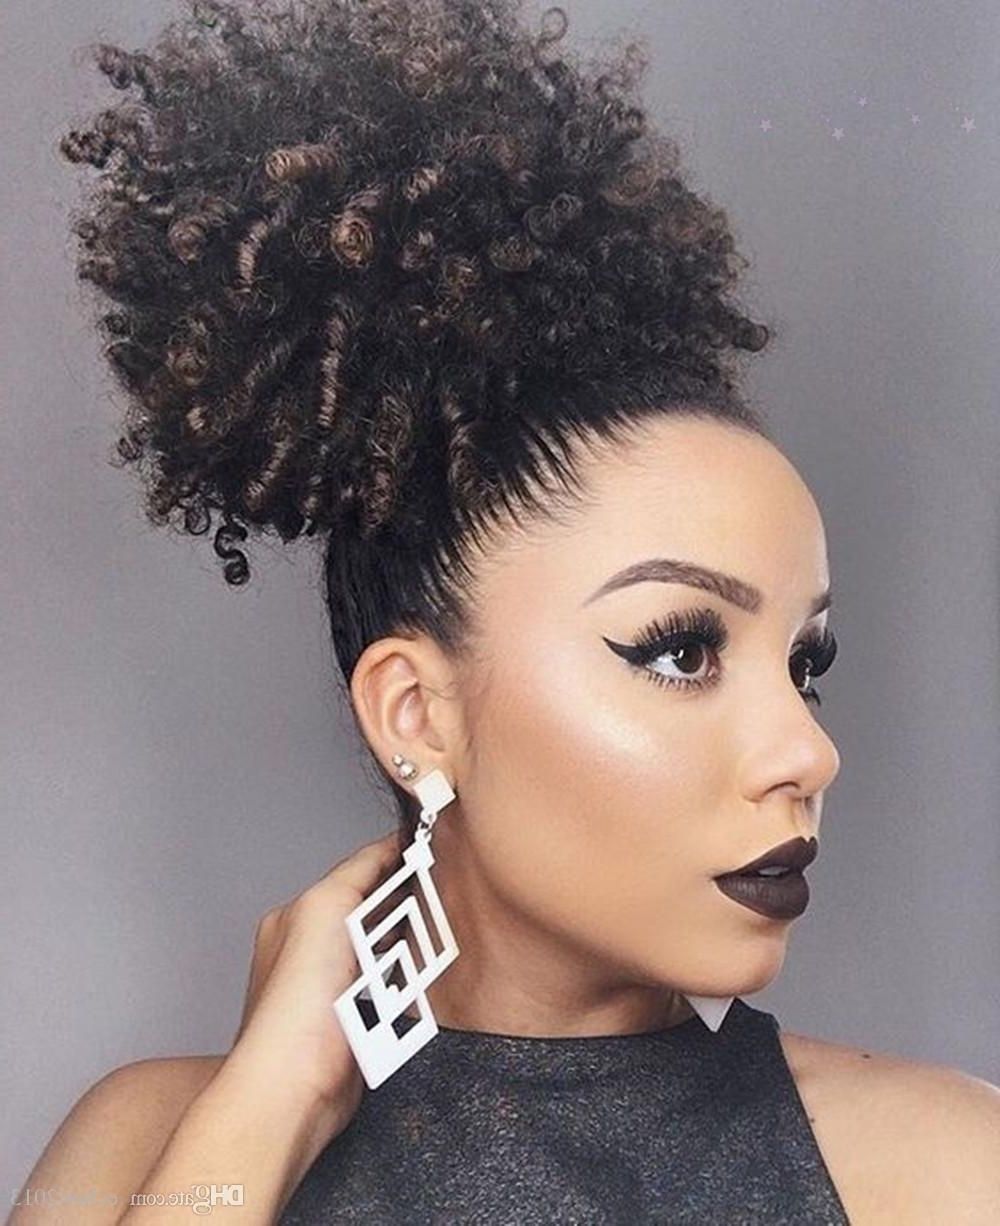 Short High Afro Ponytail Clip In Afro Kinky Curly Hair Drawstring Regarding Widely Used High Curled Do Ponytail Hairstyles For Dark Hair (View 7 of 20)